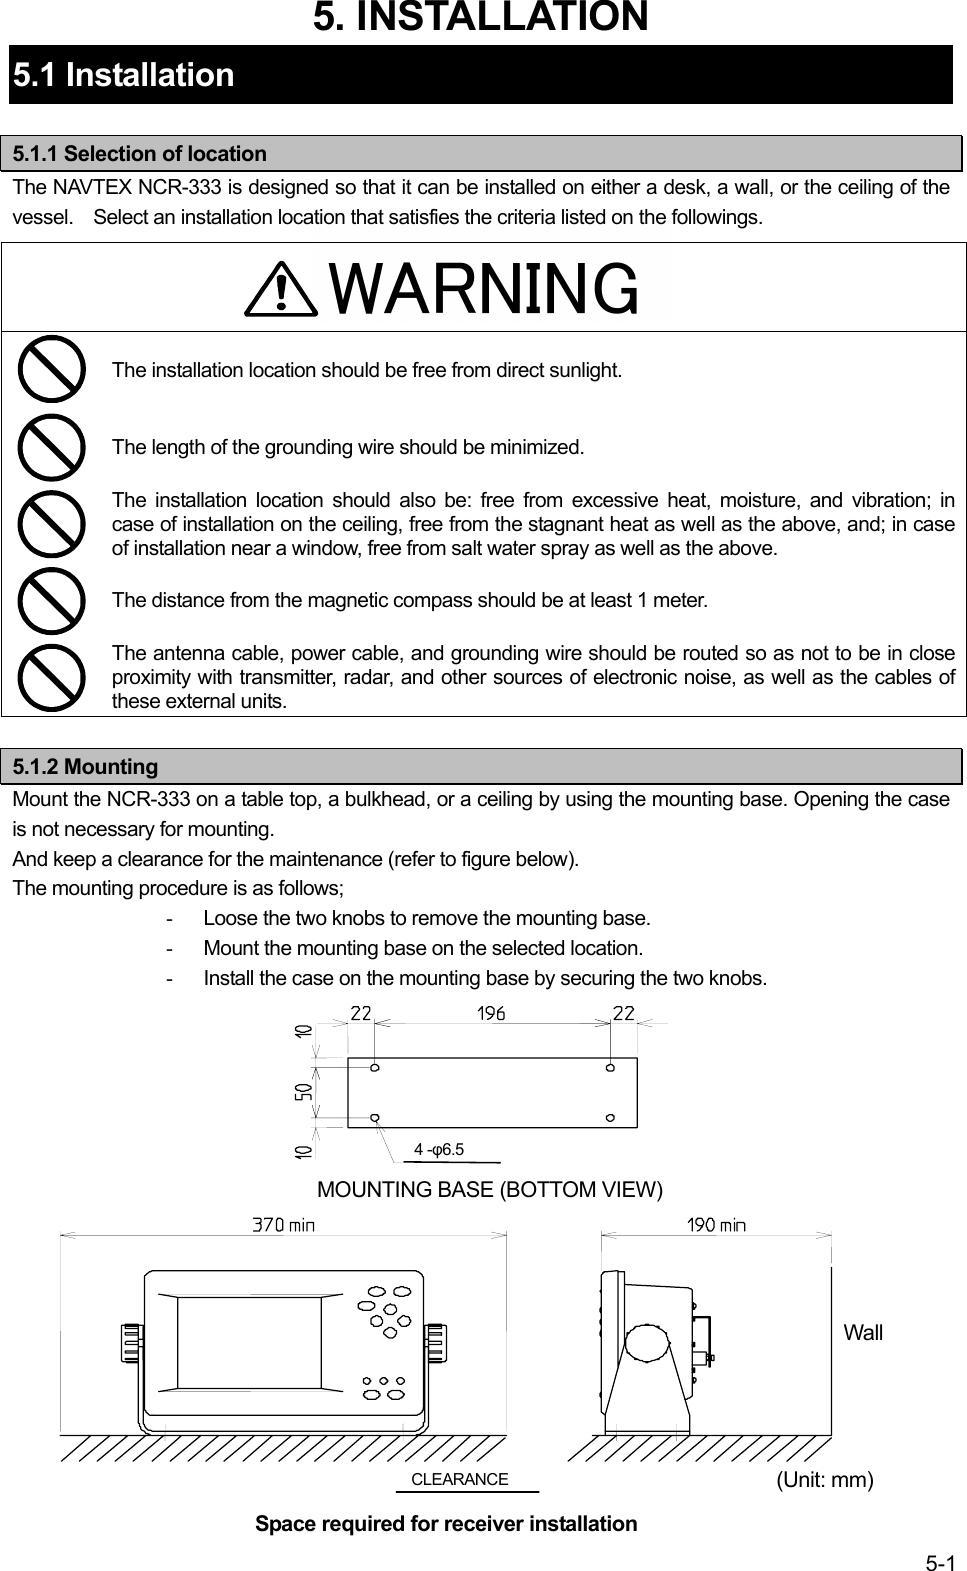 5-1 WARNING5. INSTALLATION 5.1 Installation  5.1.1 Selection of location The NAVTEX NCR-333 is designed so that it can be installed on either a desk, a wall, or the ceiling of the vessel. Select an installation location that satisfies the criteria listed on the followings.    The installation location should be free from direct sunlight.  The length of the grounding wire should be minimized.  The installation location should also be: free from excessive heat, moisture, and vibration; in case of installation on the ceiling, free from the stagnant heat as well as the above, and; in case of installation near a window, free from salt water spray as well as the above.  The distance from the magnetic compass should be at least 1 meter.  The antenna cable, power cable, and grounding wire should be routed so as not to be in close proximity with transmitter, radar, and other sources of electronic noise, as well as the cables of these external units.  5.1.2 Mounting Mount the NCR-333 on a table top, a bulkhead, or a ceiling by using the mounting base. Opening the case is not necessary for mounting. And keep a clearance for the maintenance (refer to figure below). The mounting procedure is as follows; -  Loose the two knobs to remove the mounting base. -  Mount the mounting base on the selected location. -  Install the case on the mounting base by securing the two knobs.                  CLEARANCE Space required for receiver installation (Unit: mm) MOUNTING BASE (BOTTOM VIEW) 4 -φ6.5 Wall